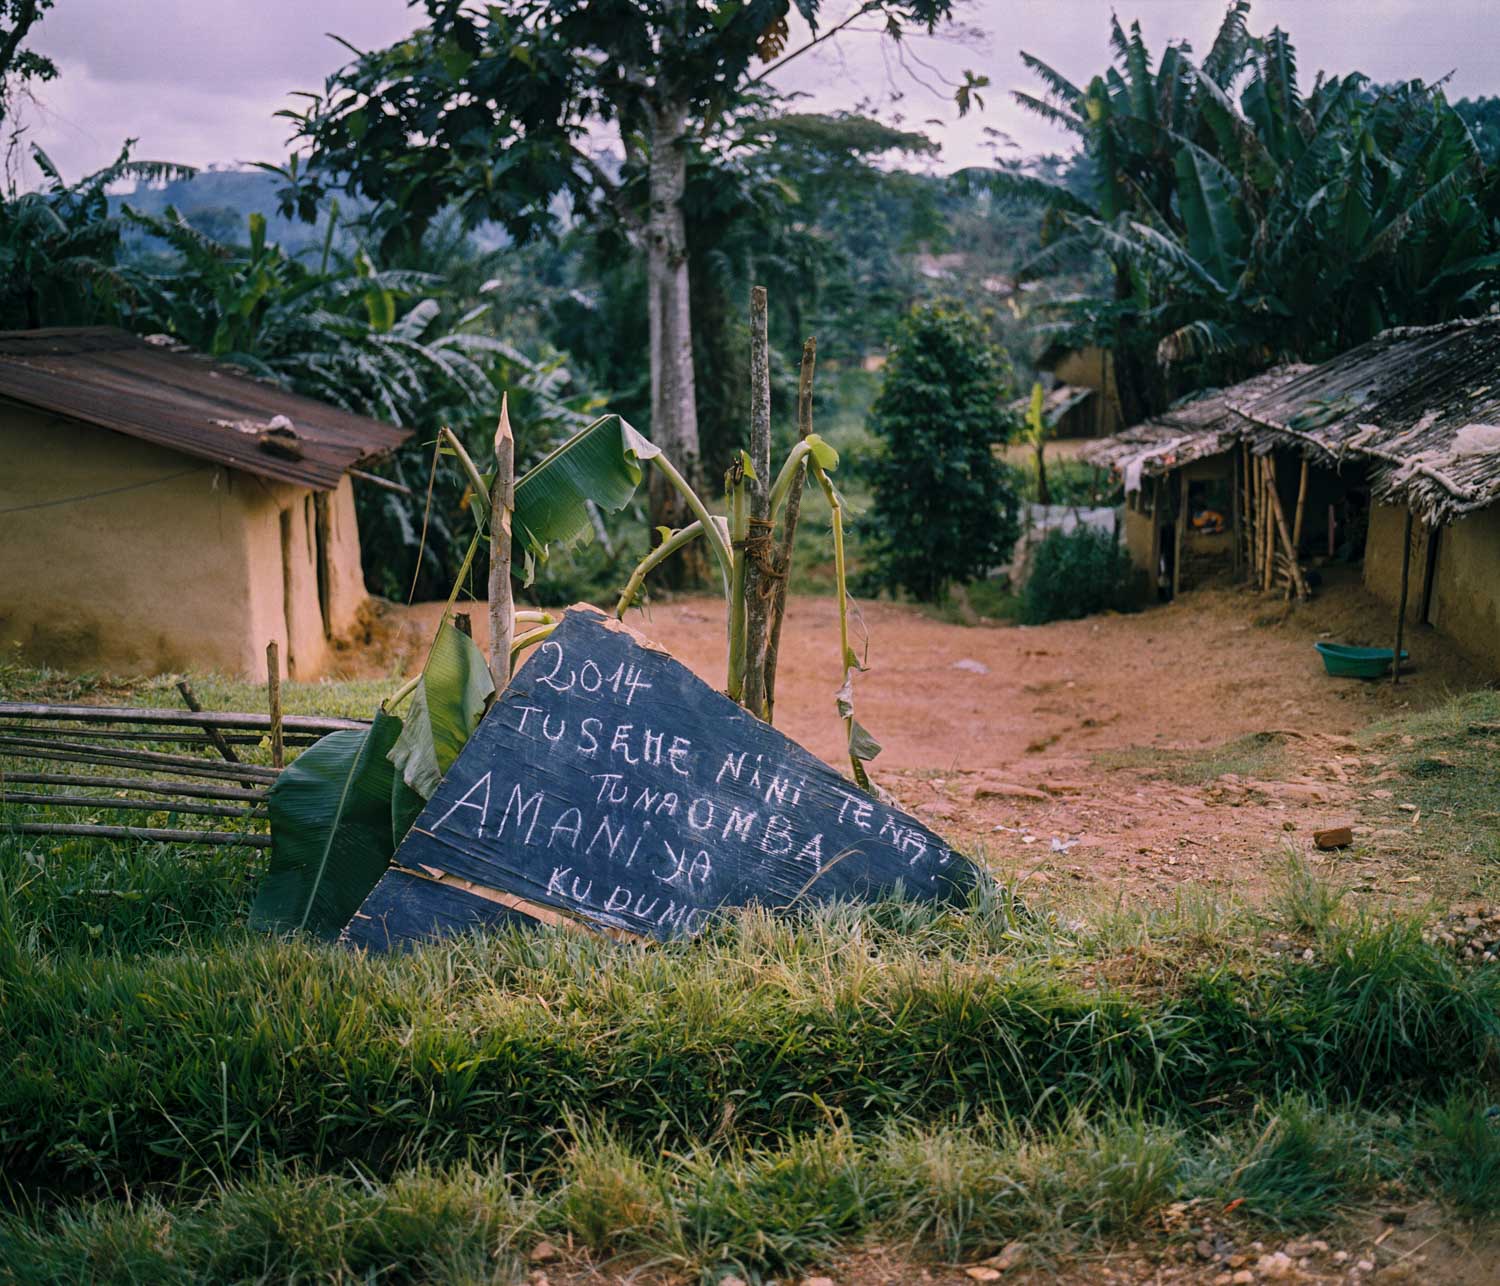  On New Year's Eve, a roadside sign reads, "2014, what shall we say again? We ask for lasting peace."&nbsp;Dec. 31, 2013. Lulingu, South Kivu, Democratic Republic of the Congo.&nbsp; 